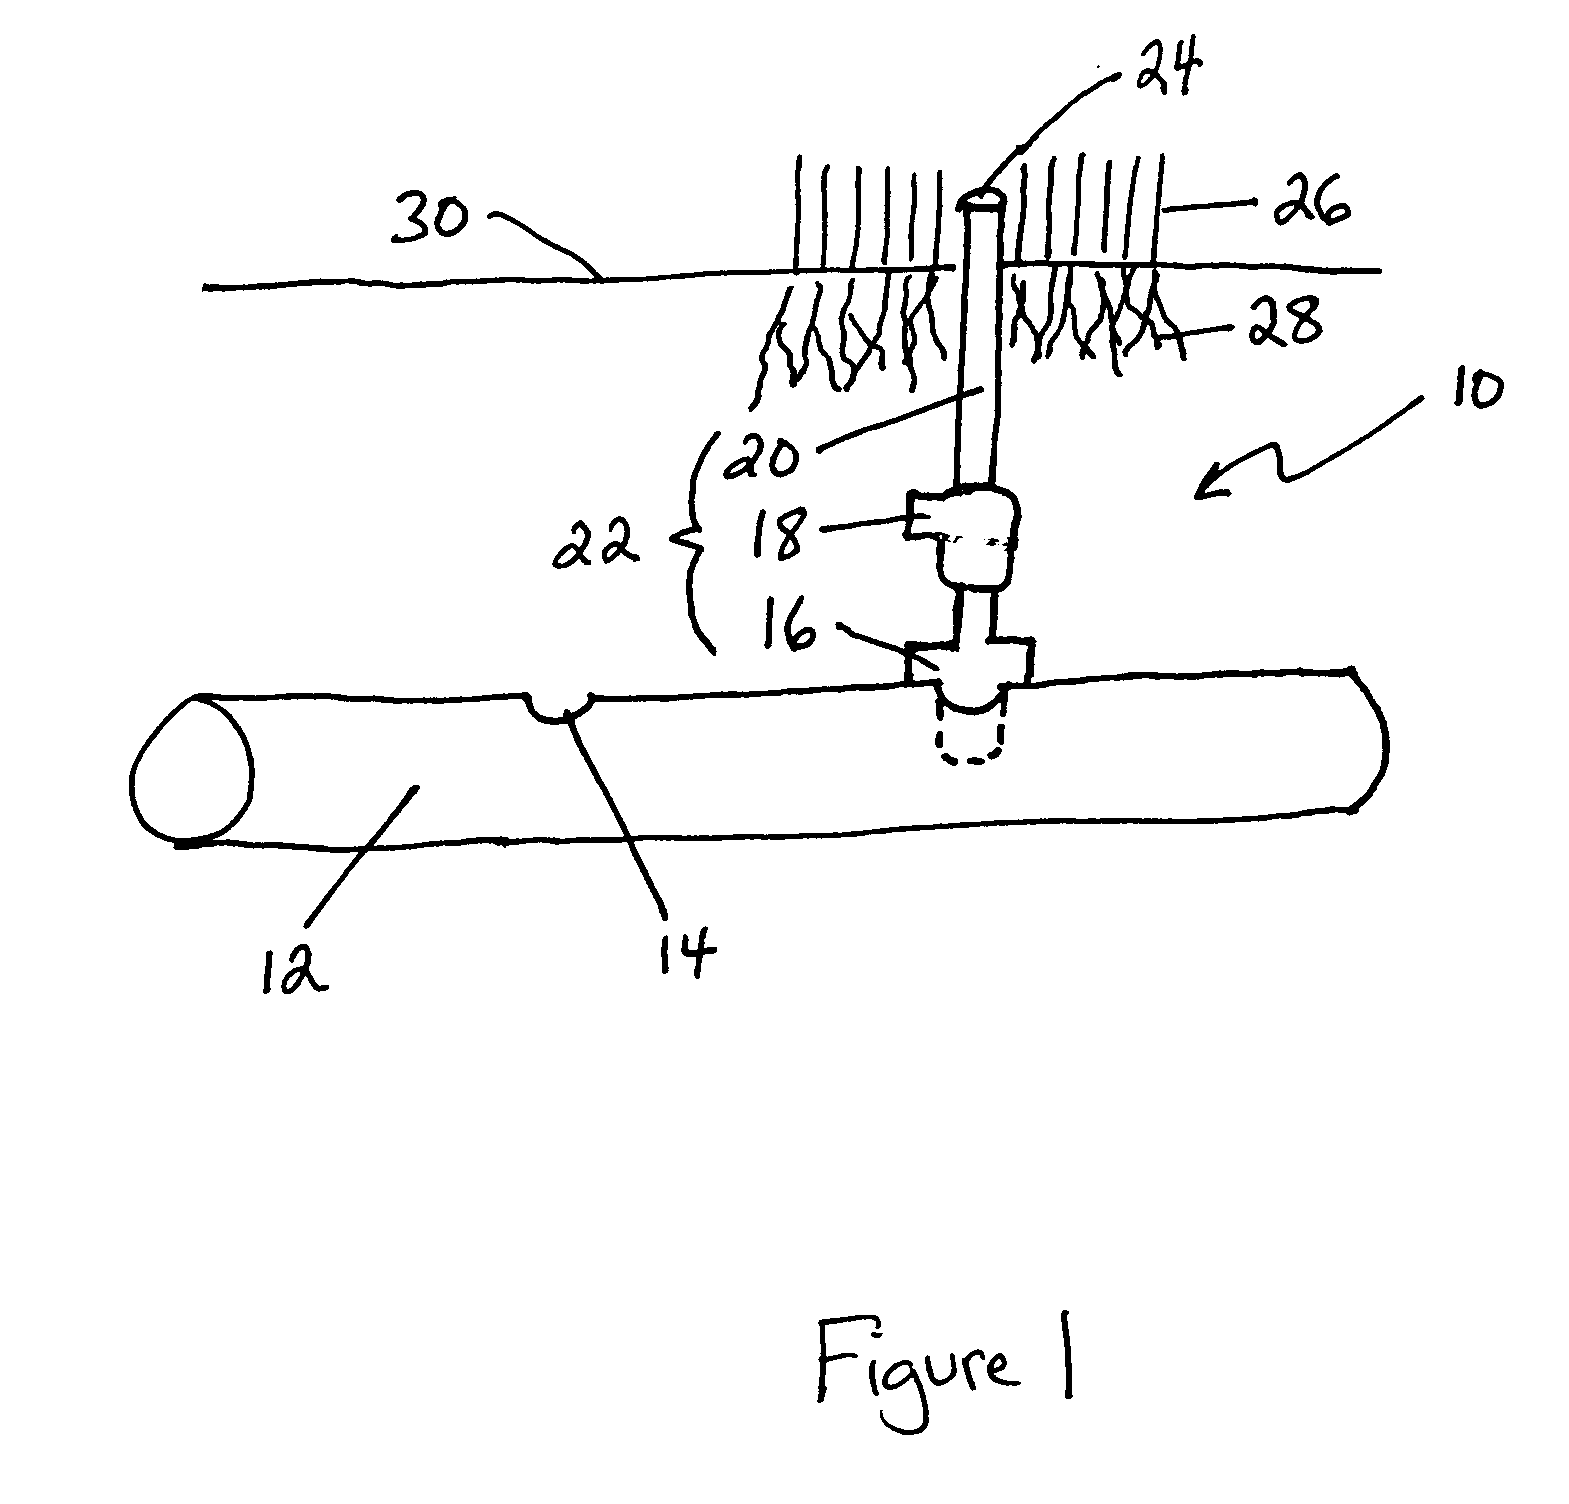 Water-conserving surface irrigation systems and methods